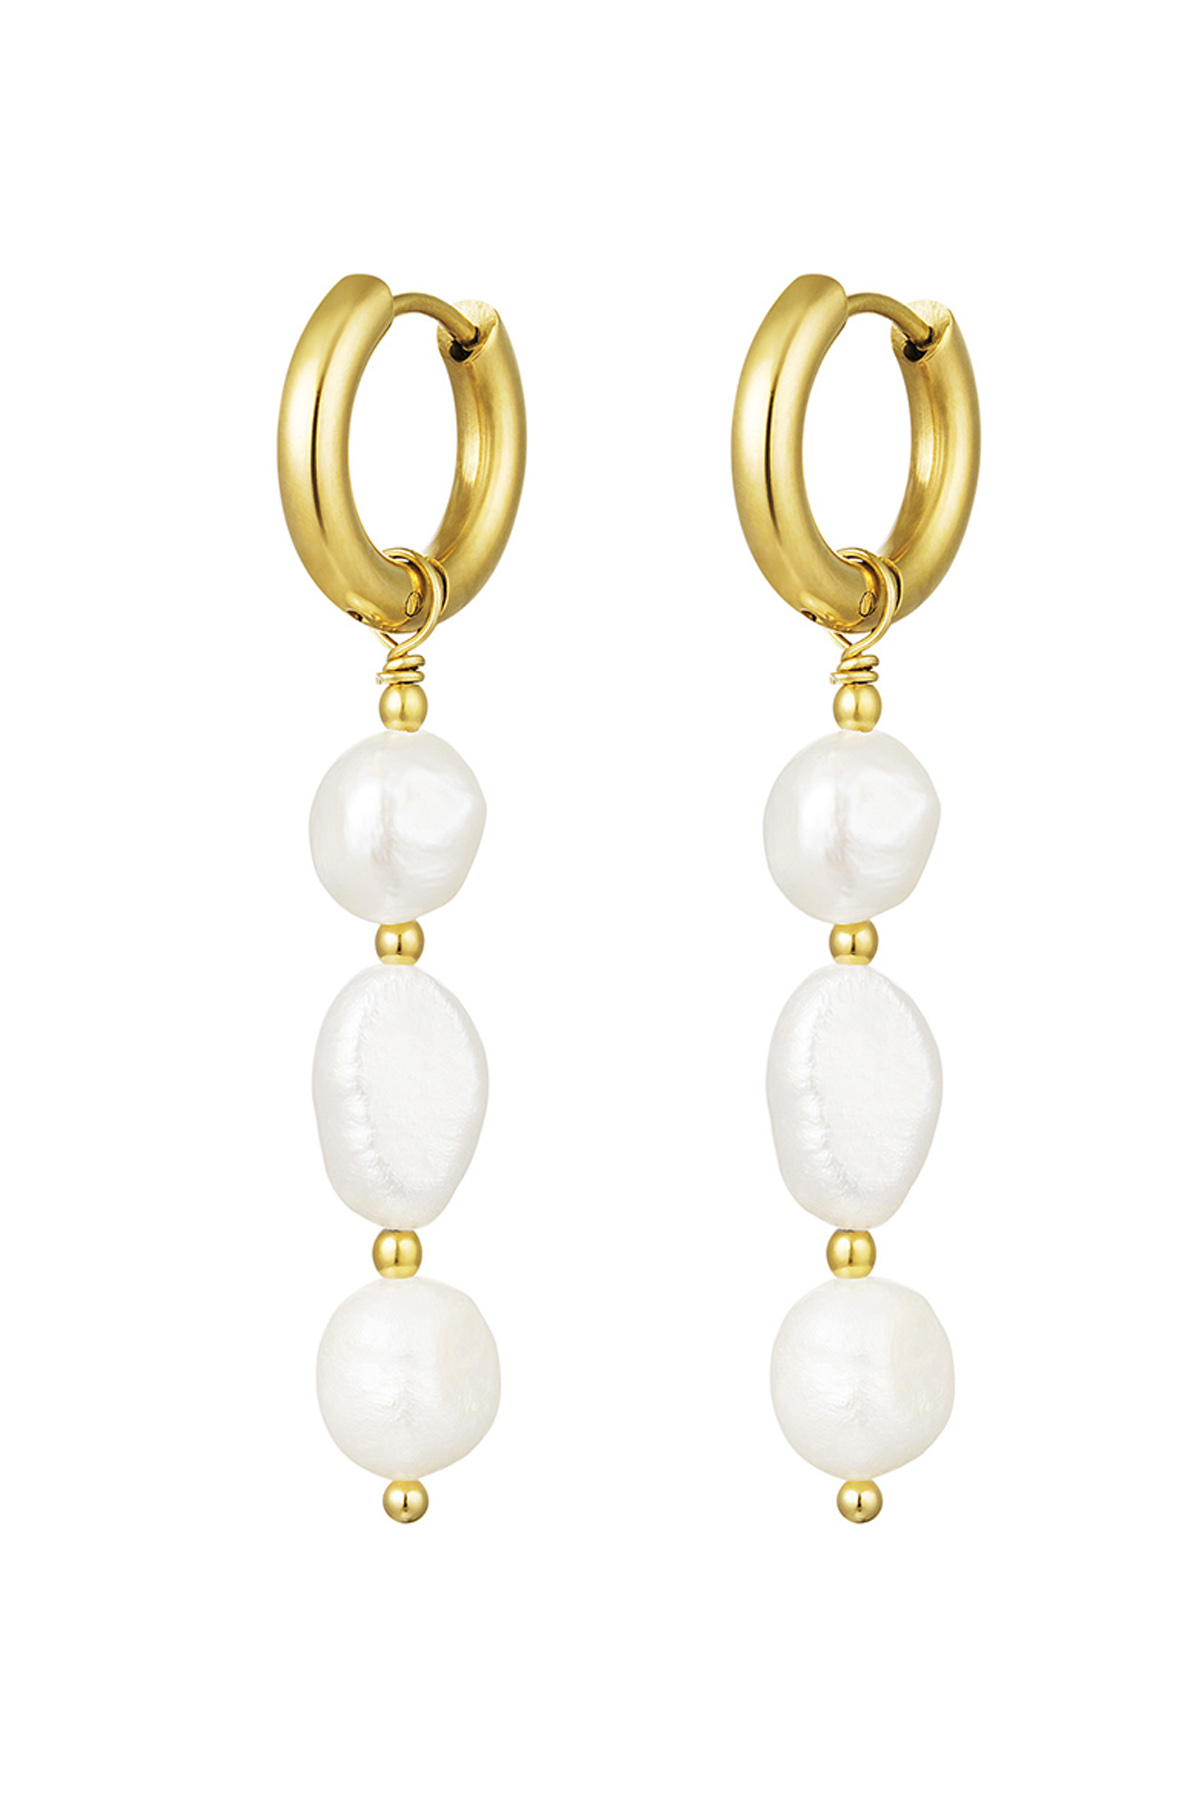 Earrings pearl party - gold Stainless Steel h5 